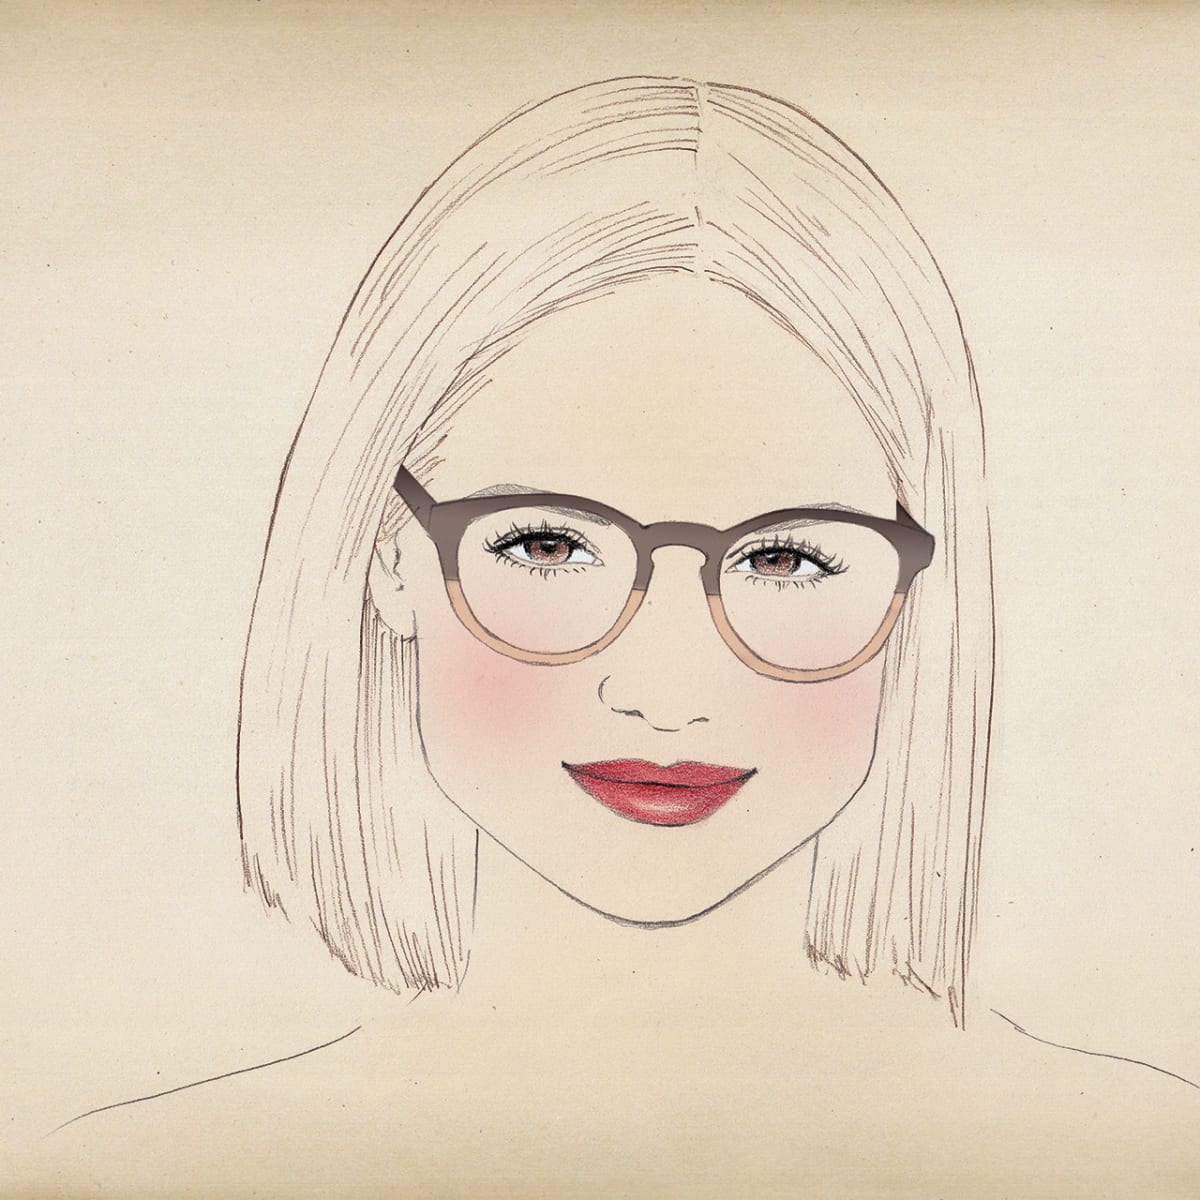 How To Choose The Right Frames For Your Face Shape